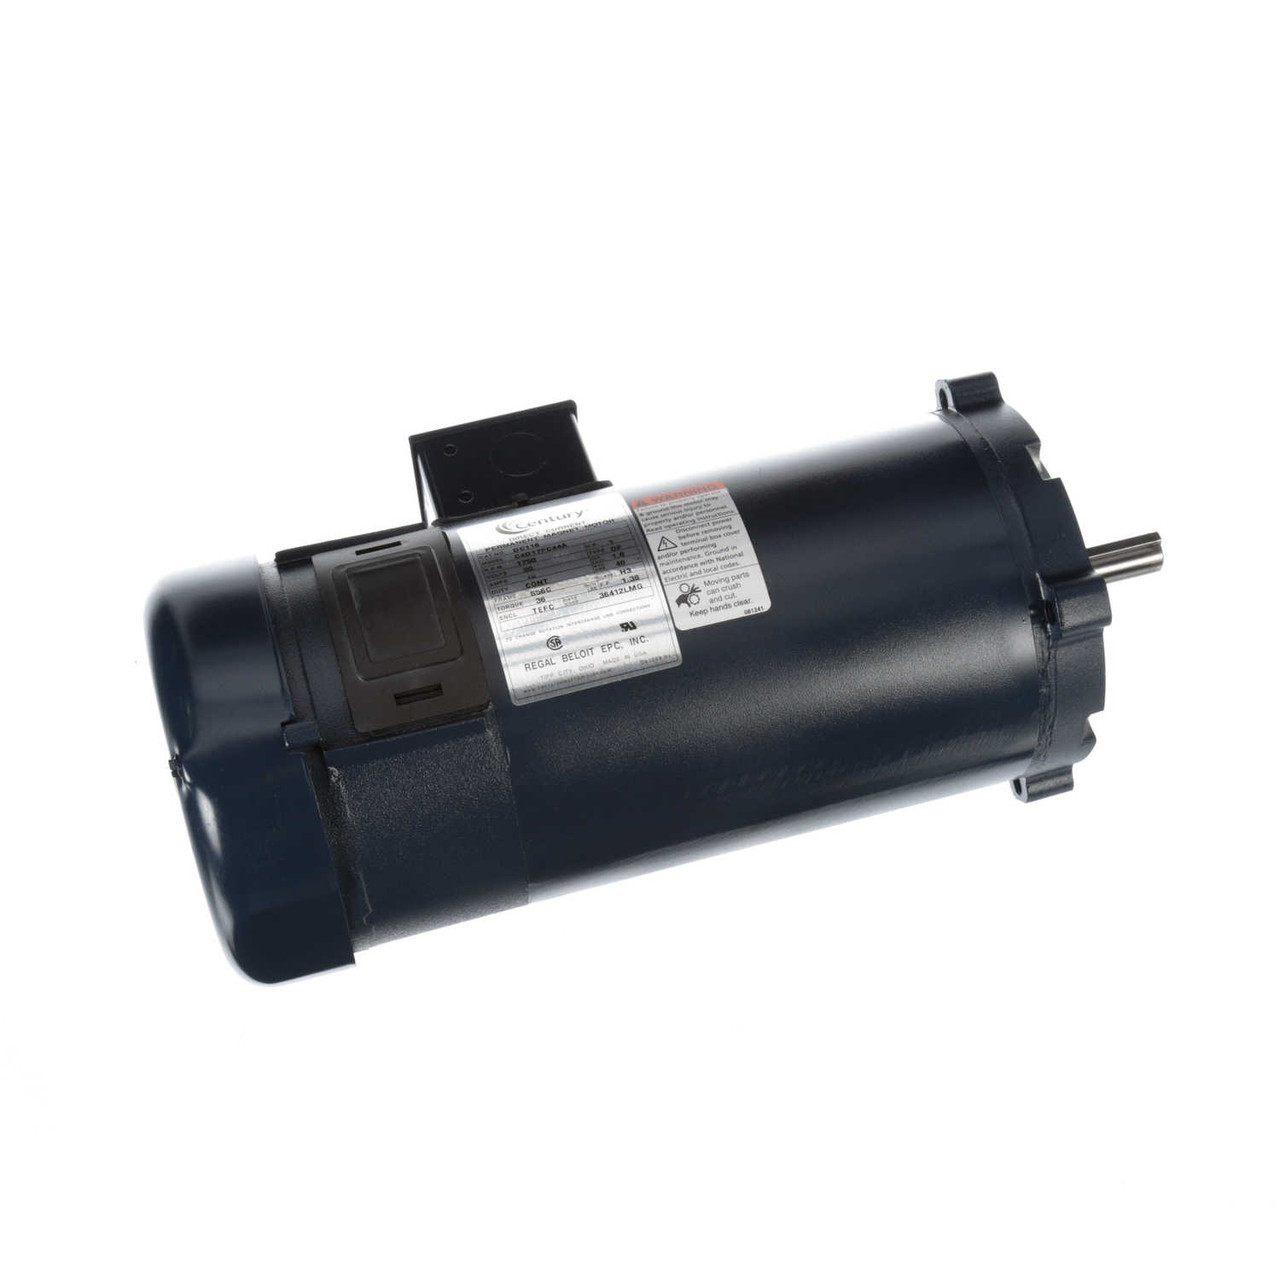 DC116 Permanent Magnet SCR Rated Totally Enclosed C-Face Motor 1 HP